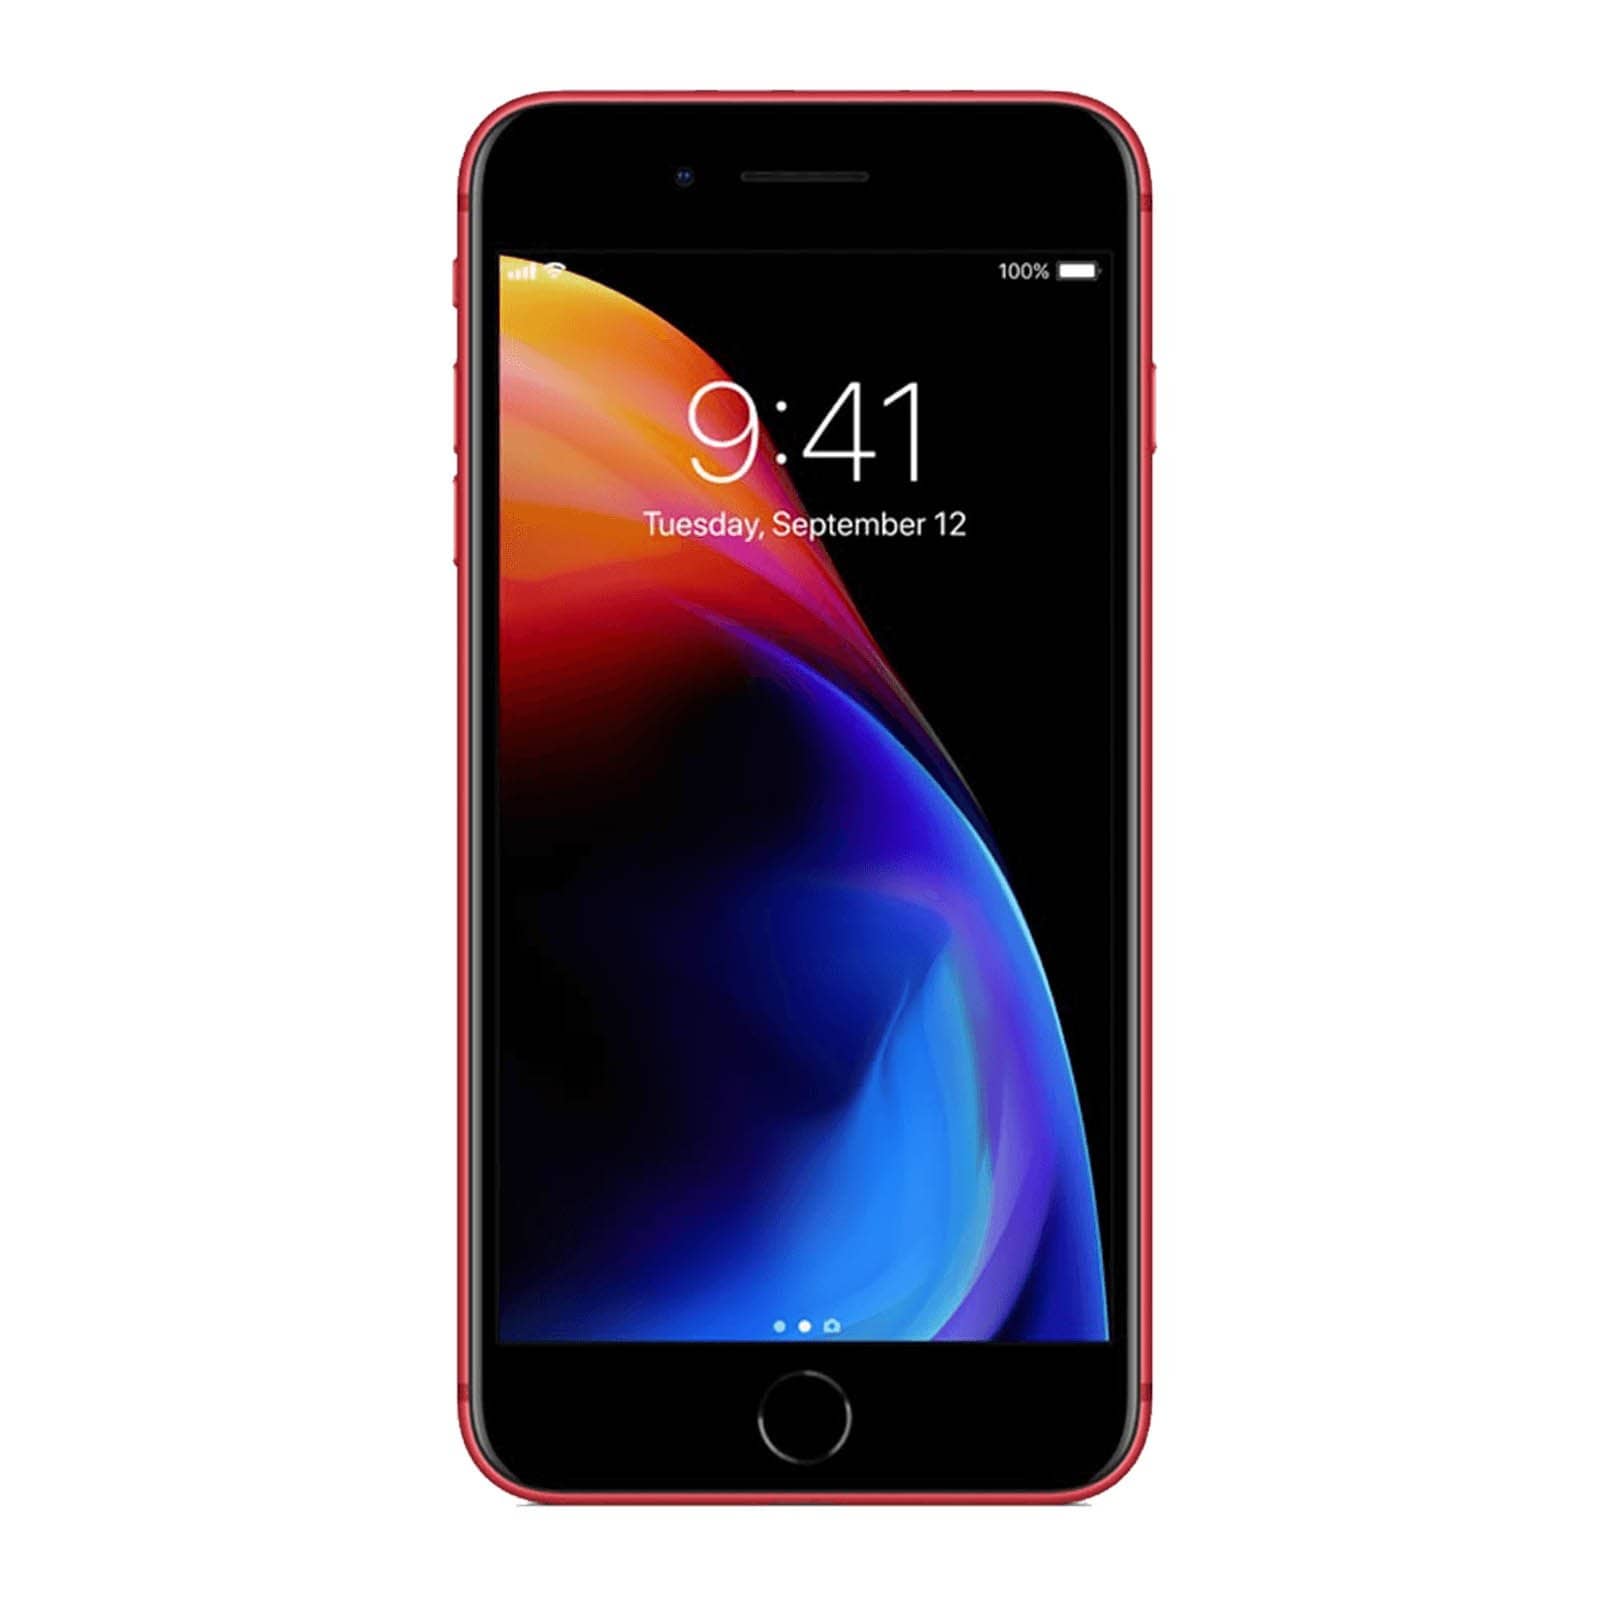 Apple iPhone 8 Plus 256GB Product Red Very Good - Unlocked